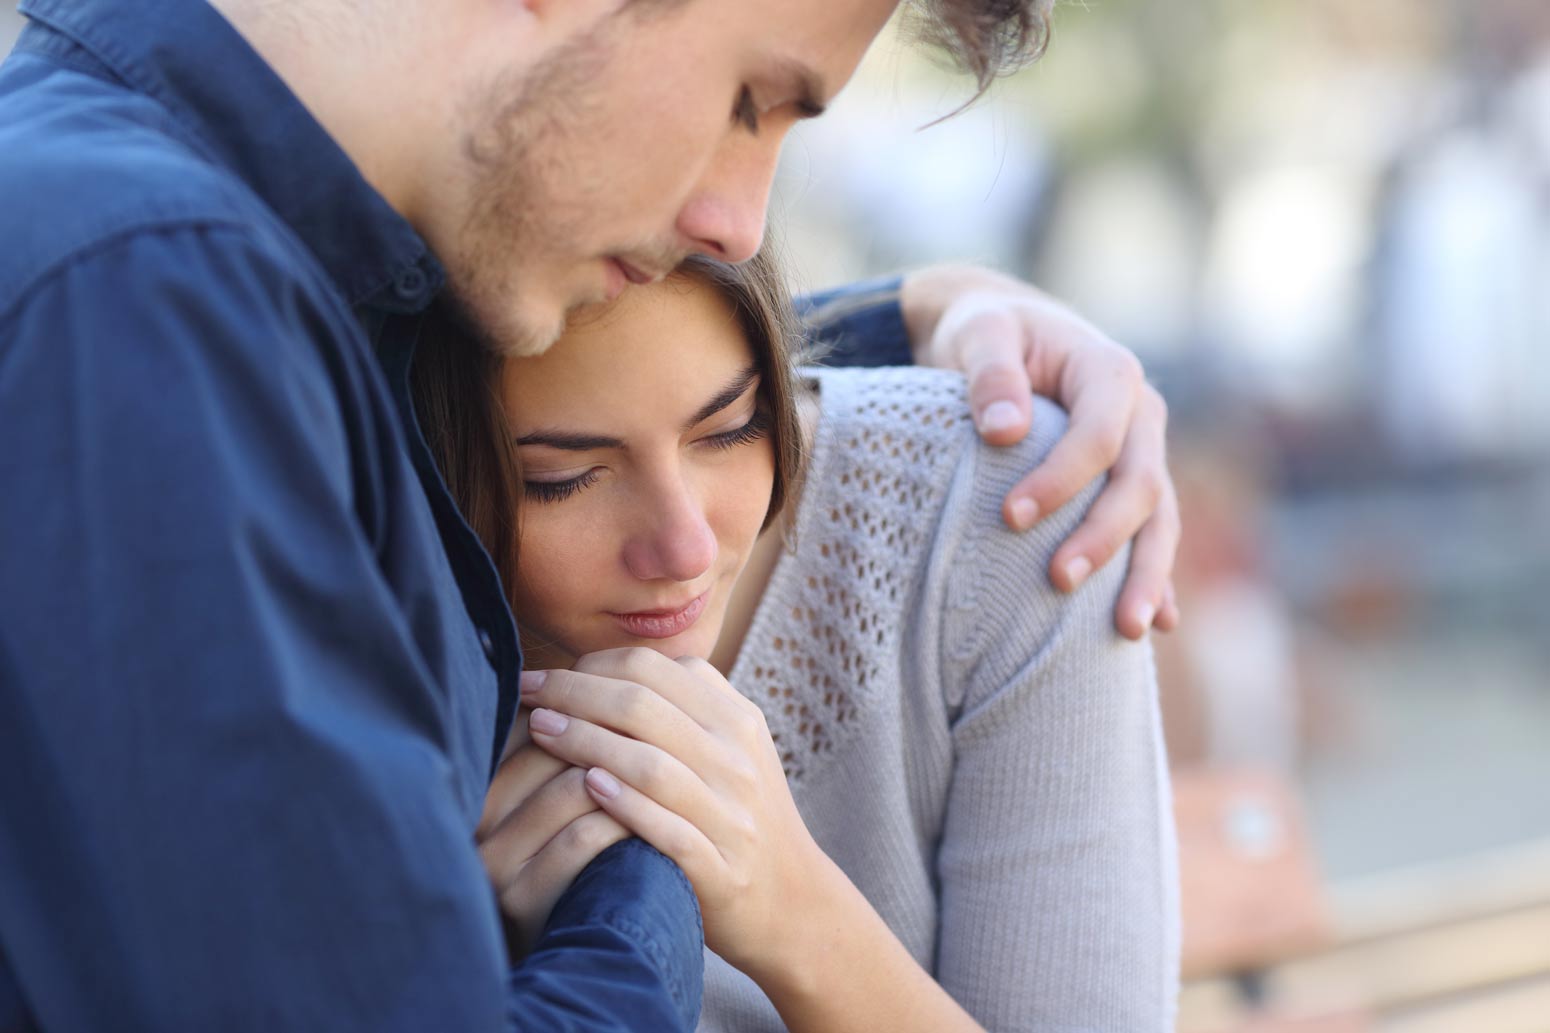 man with arm around woman, both with crestfallen faces